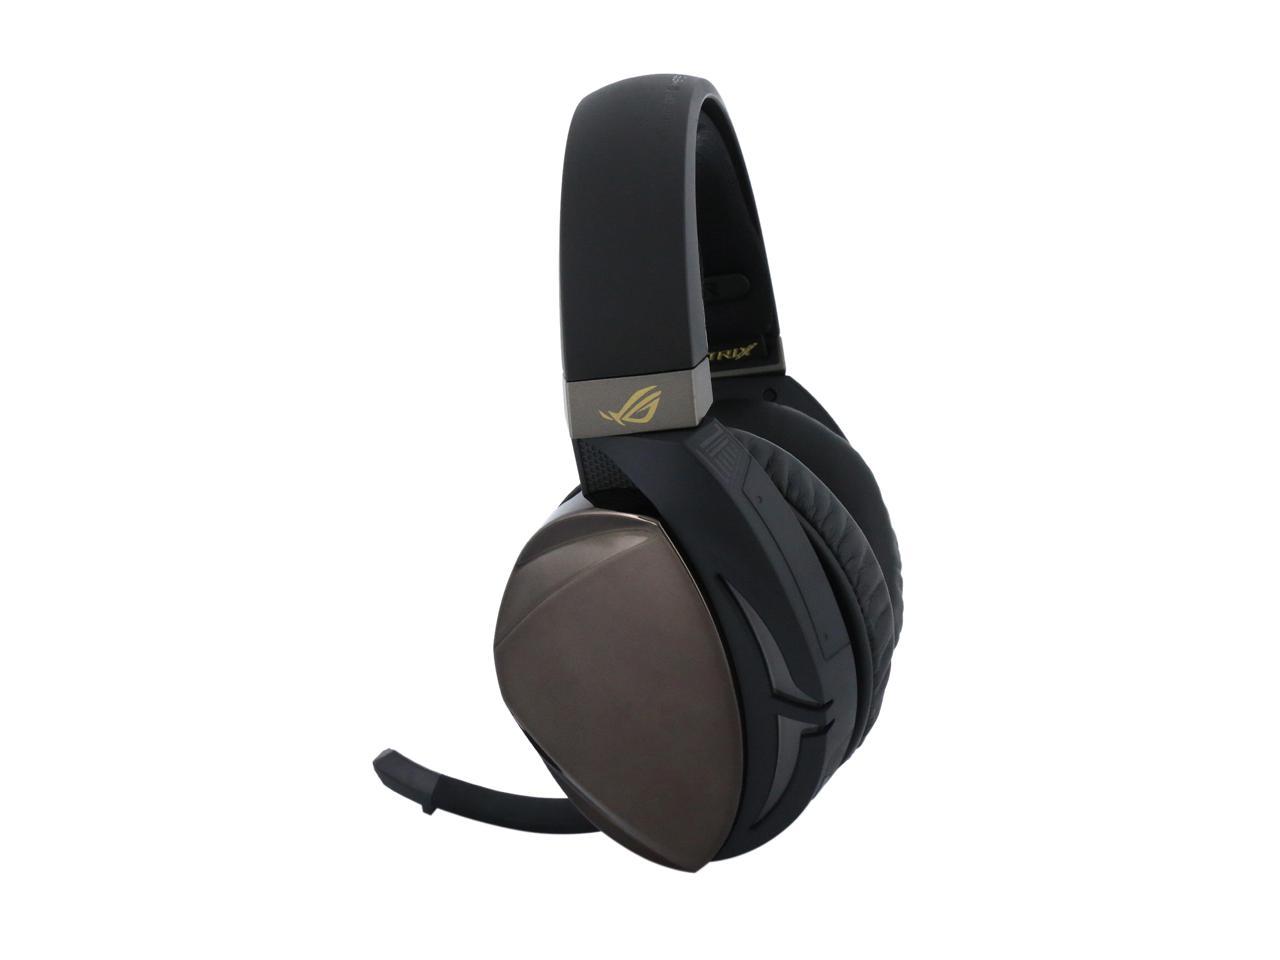 Asus Rog Strix Fusion 700 Virtual 7 1 Led Bluetooth Gaming Headset For Pc Ps4 And Nintendo Switch With Digital Microphone Bluetooth And Aura Sync Rgb Lighting Newegg Com